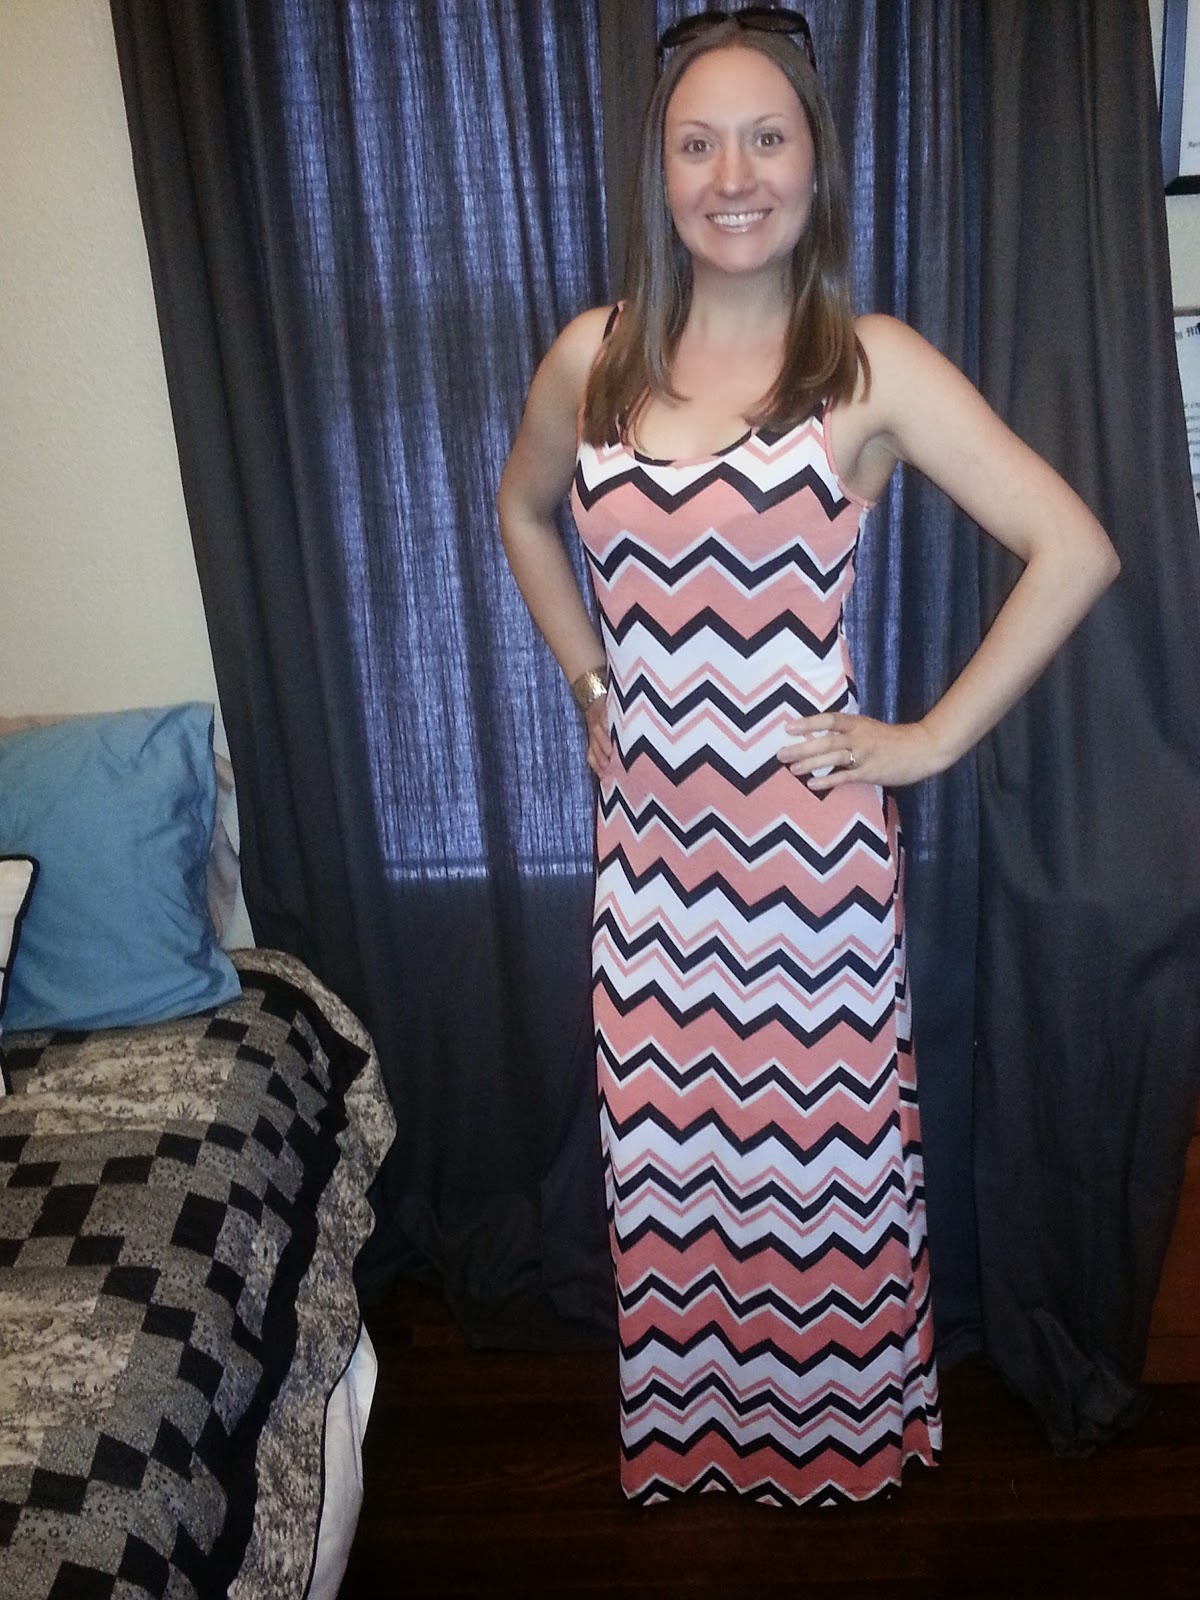 Stylish Surprises from Little by Me: Spring Maxi Dress #Review - Mommy ...